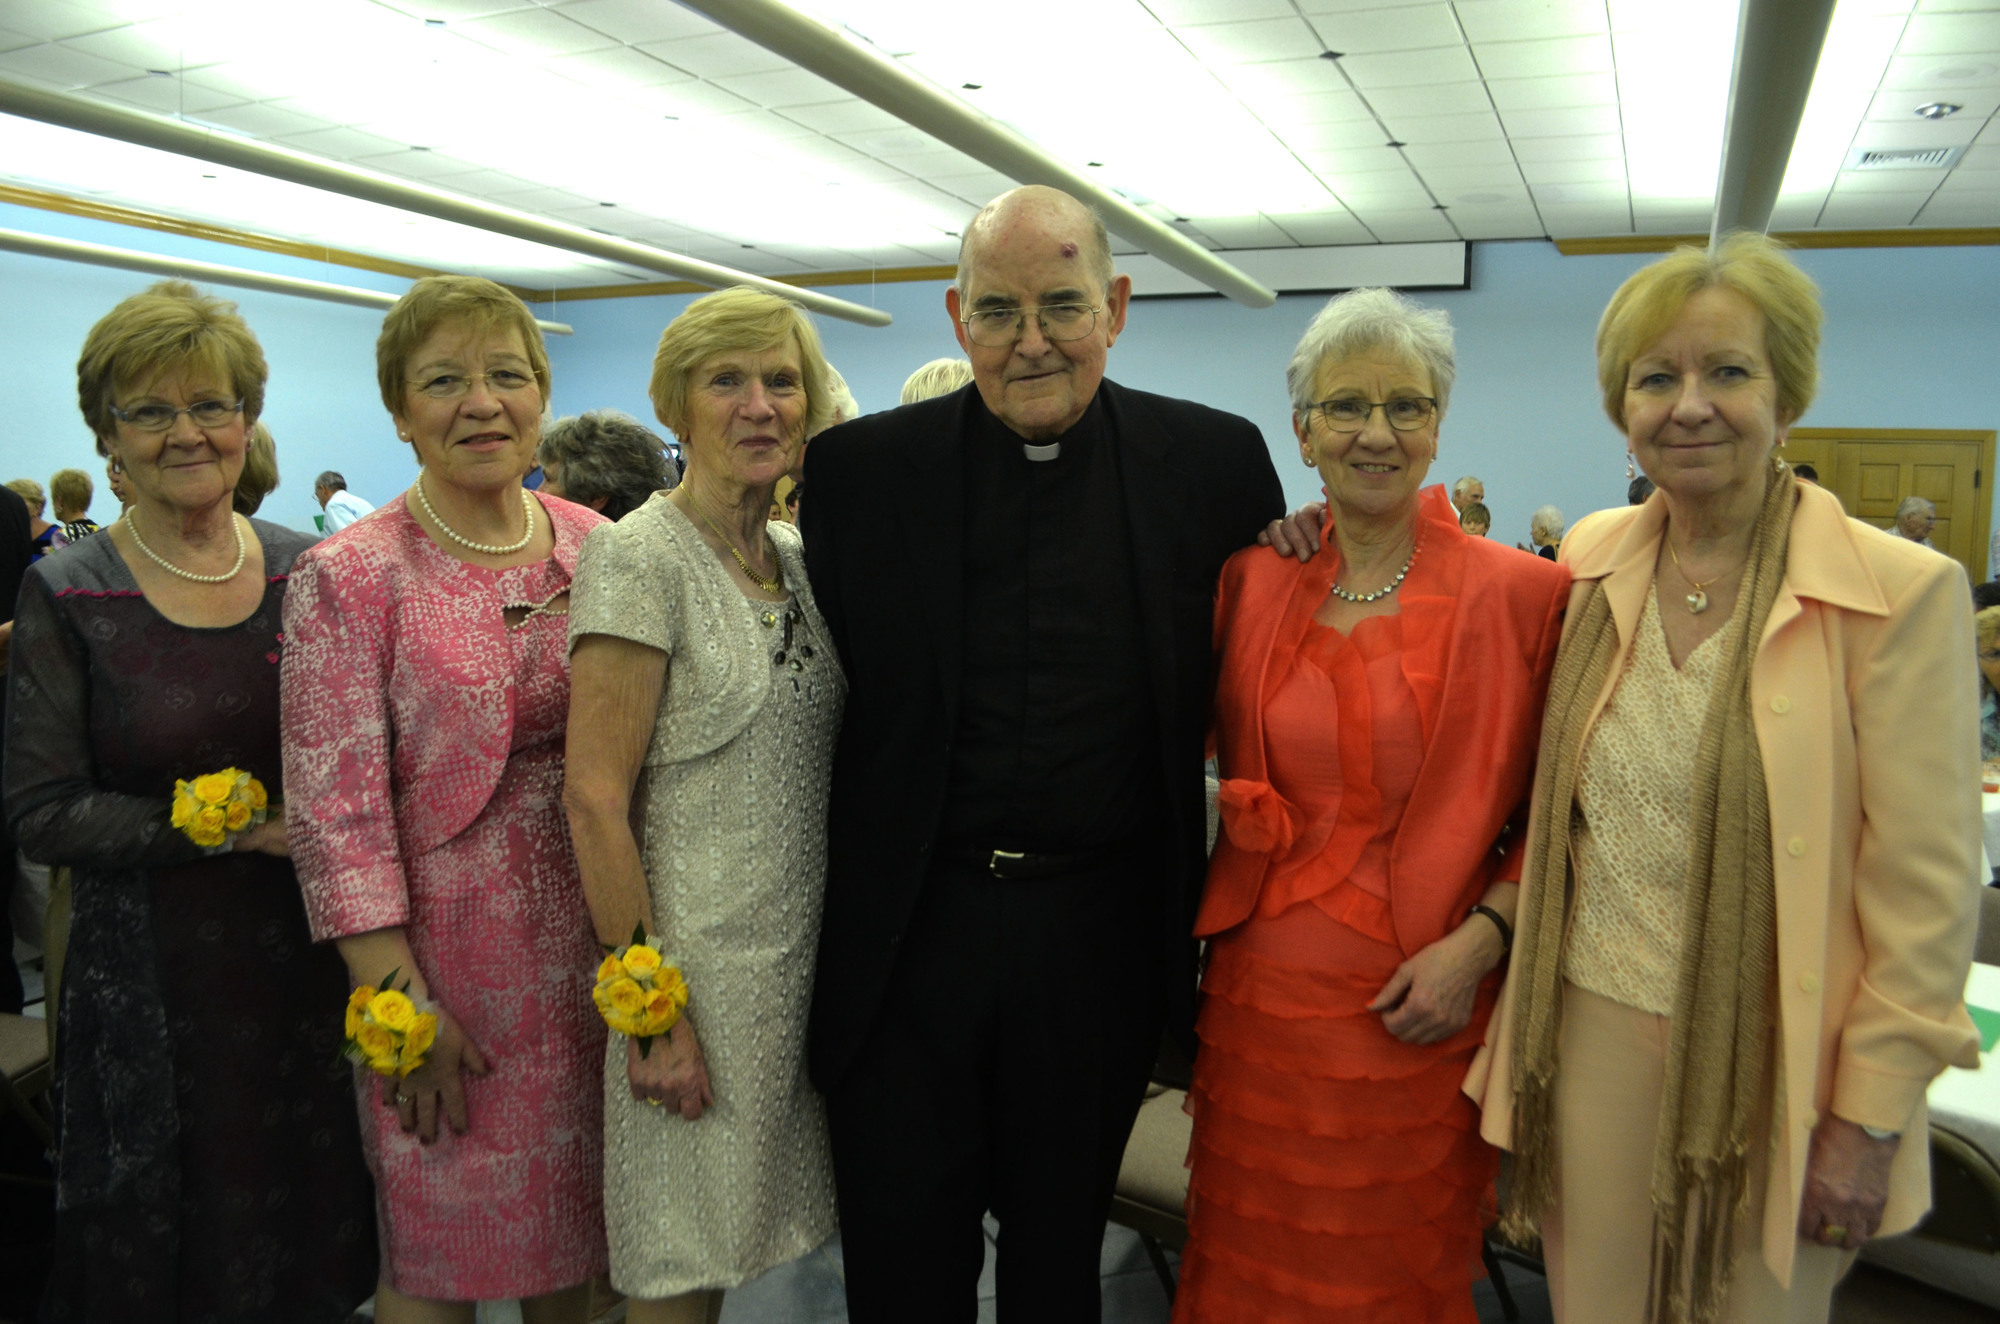 Monsignor Gerry Finegan with his five sisters Áine Connelly, Catherine O’Leary, Mary Tunney, Brigid Duffy and Josephine Finegan at his golden jubilee celebration on May 7, 2017. Photo by Katie Johns.